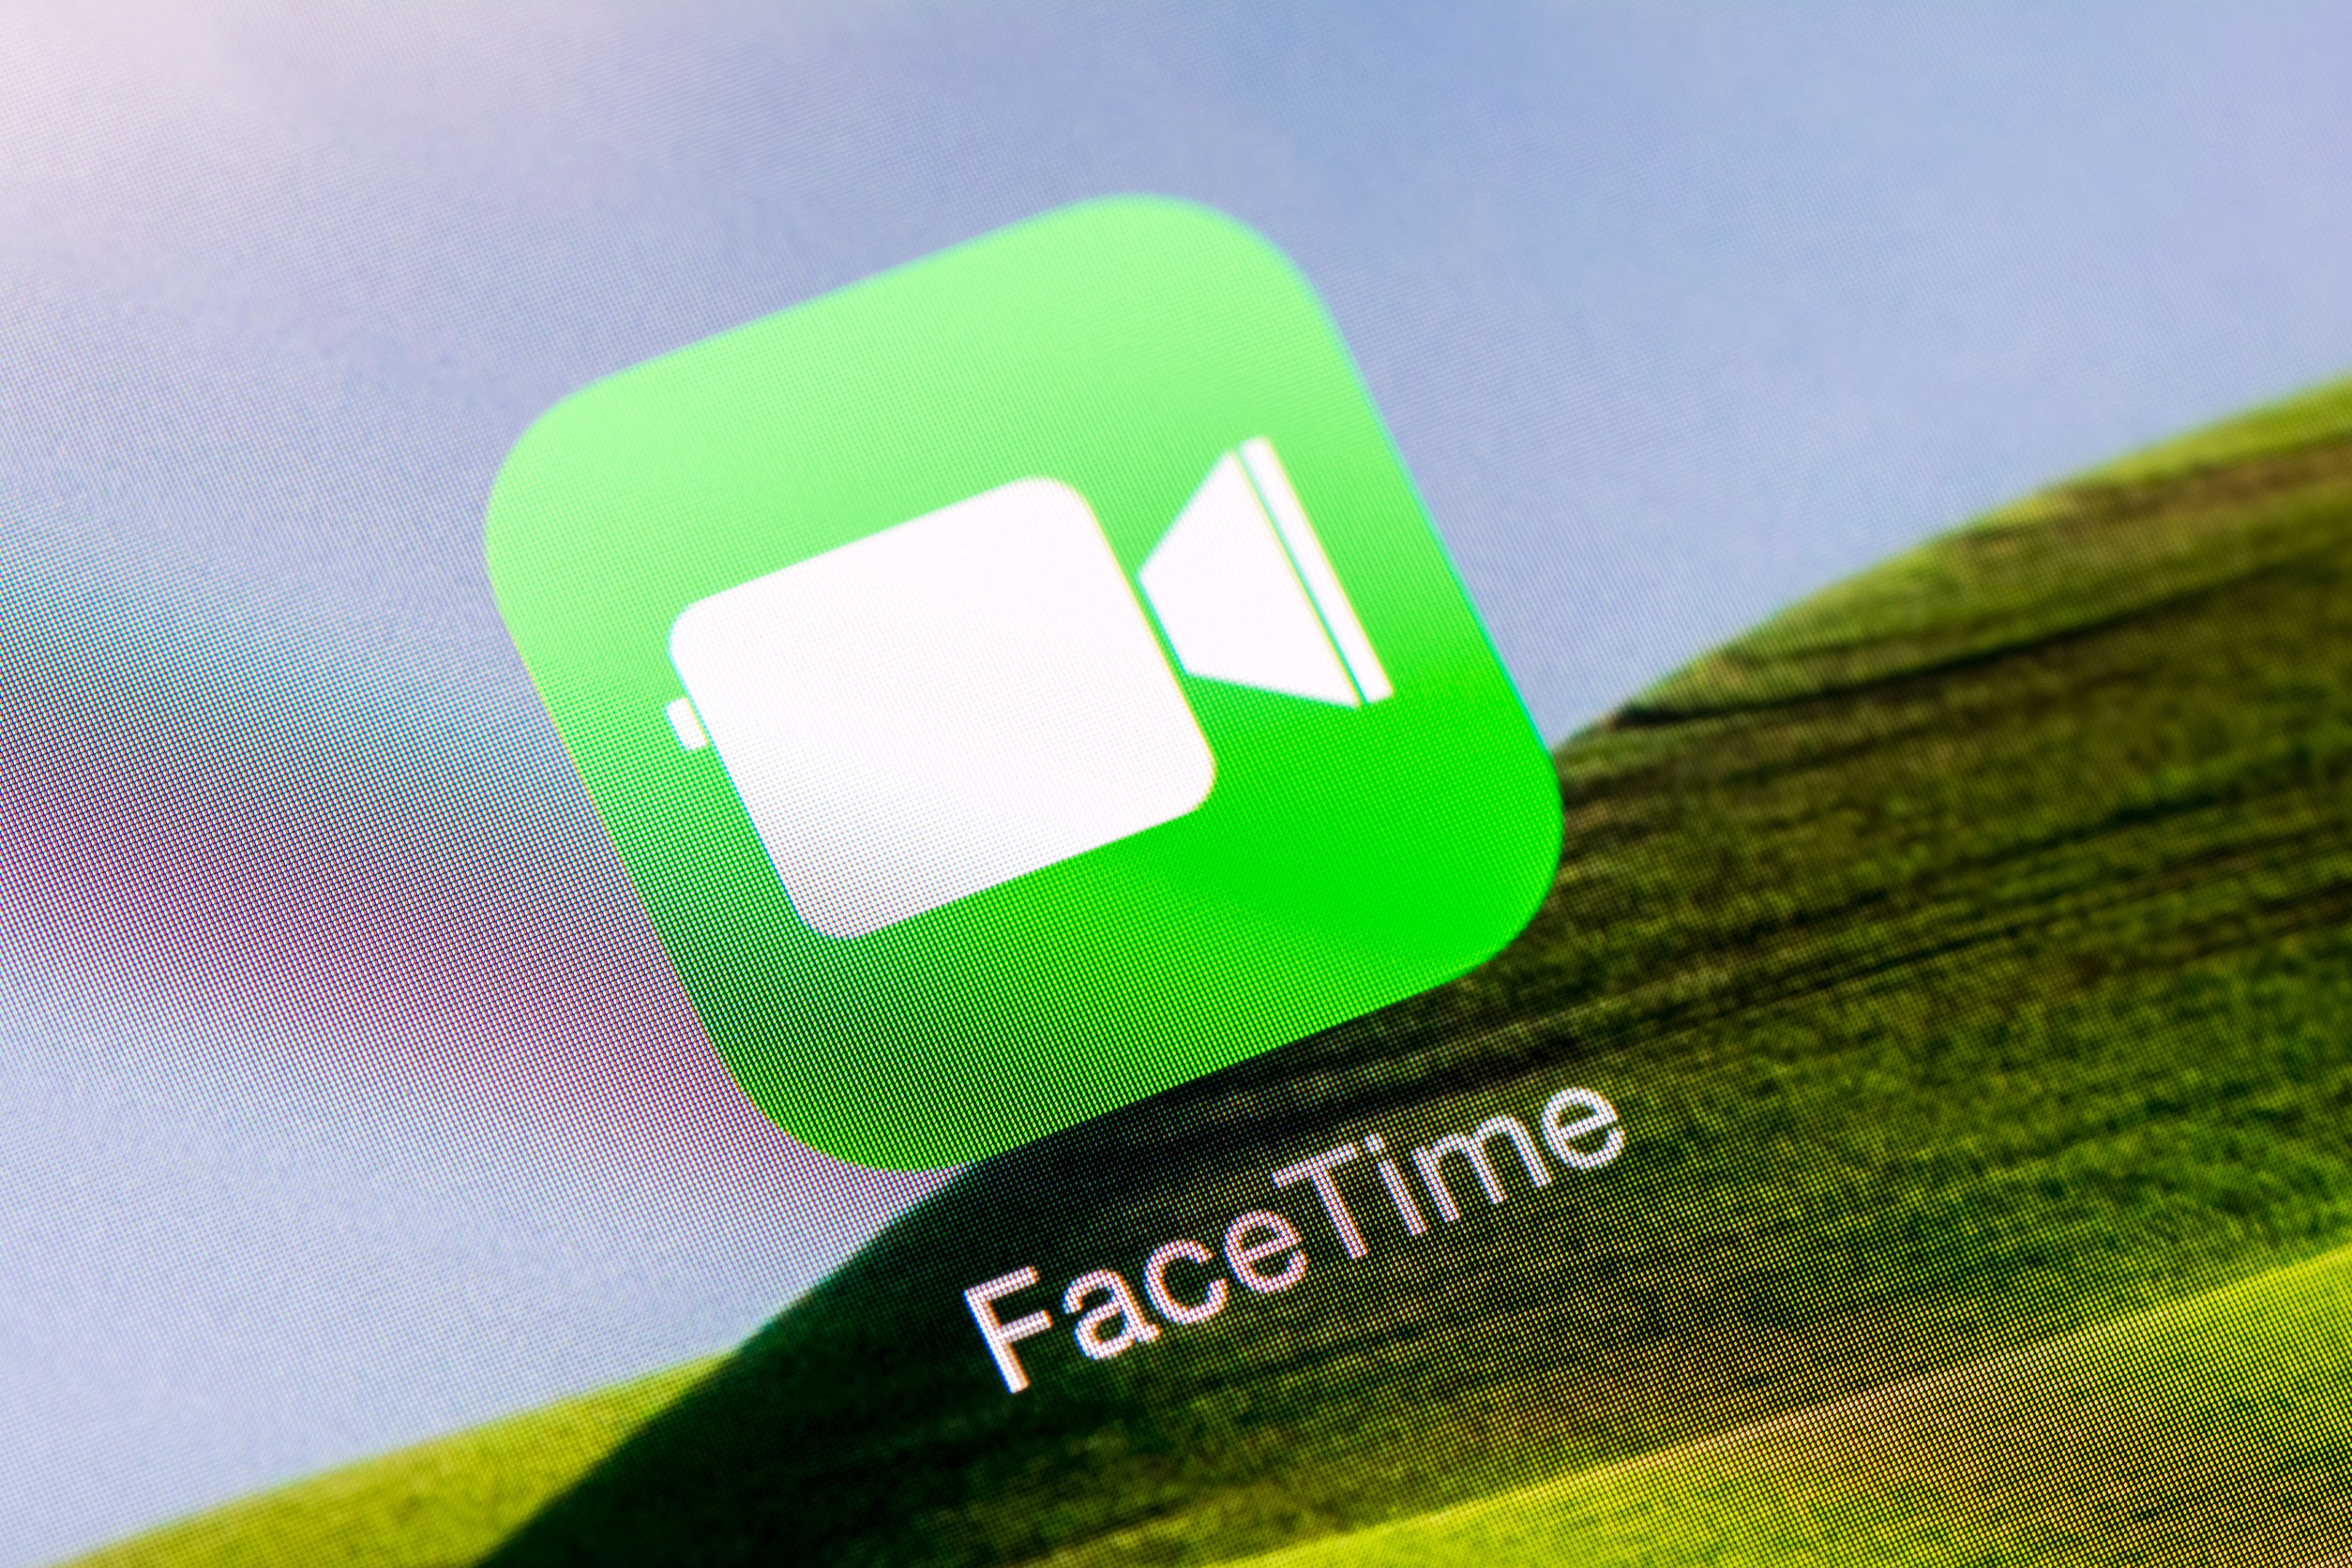 Tencent Security Release FaceTime Video Fraud Warning: Do Not Accept the Invitation